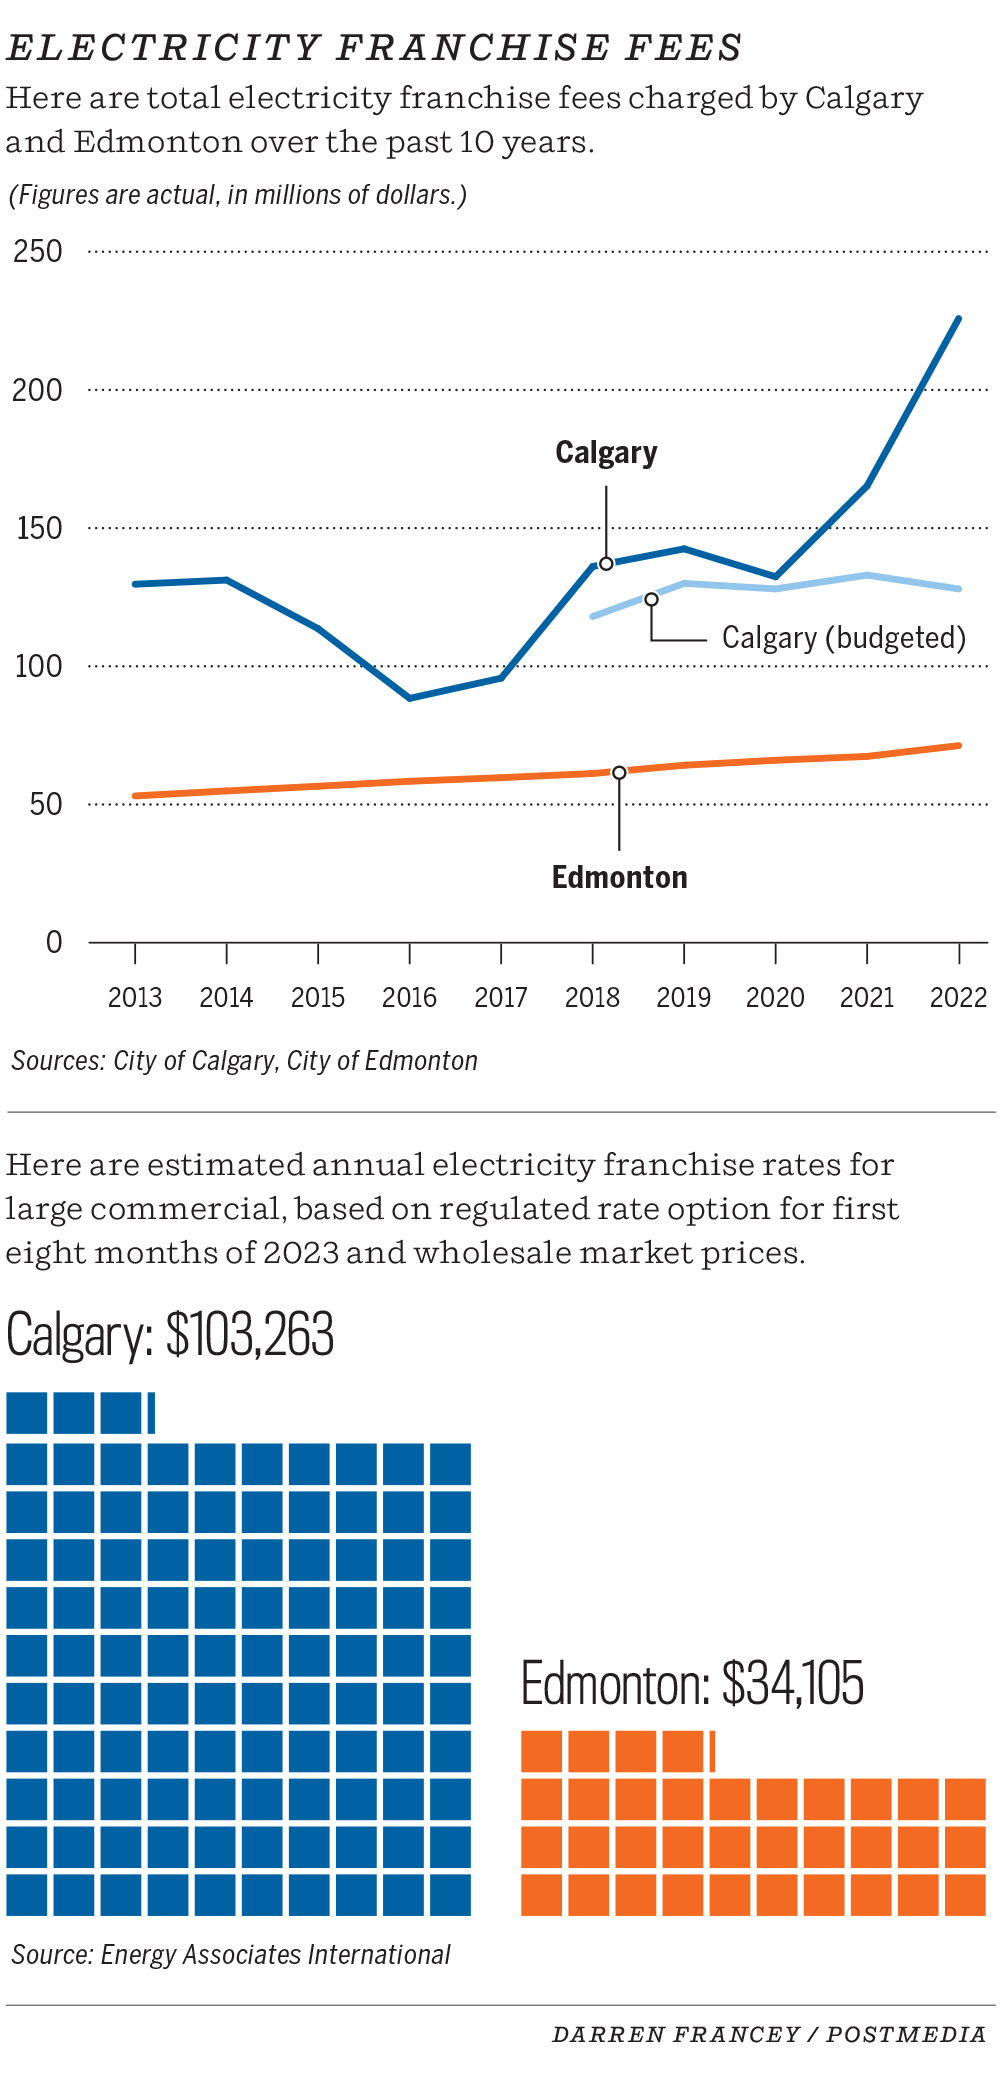 Franchise fees for electricity